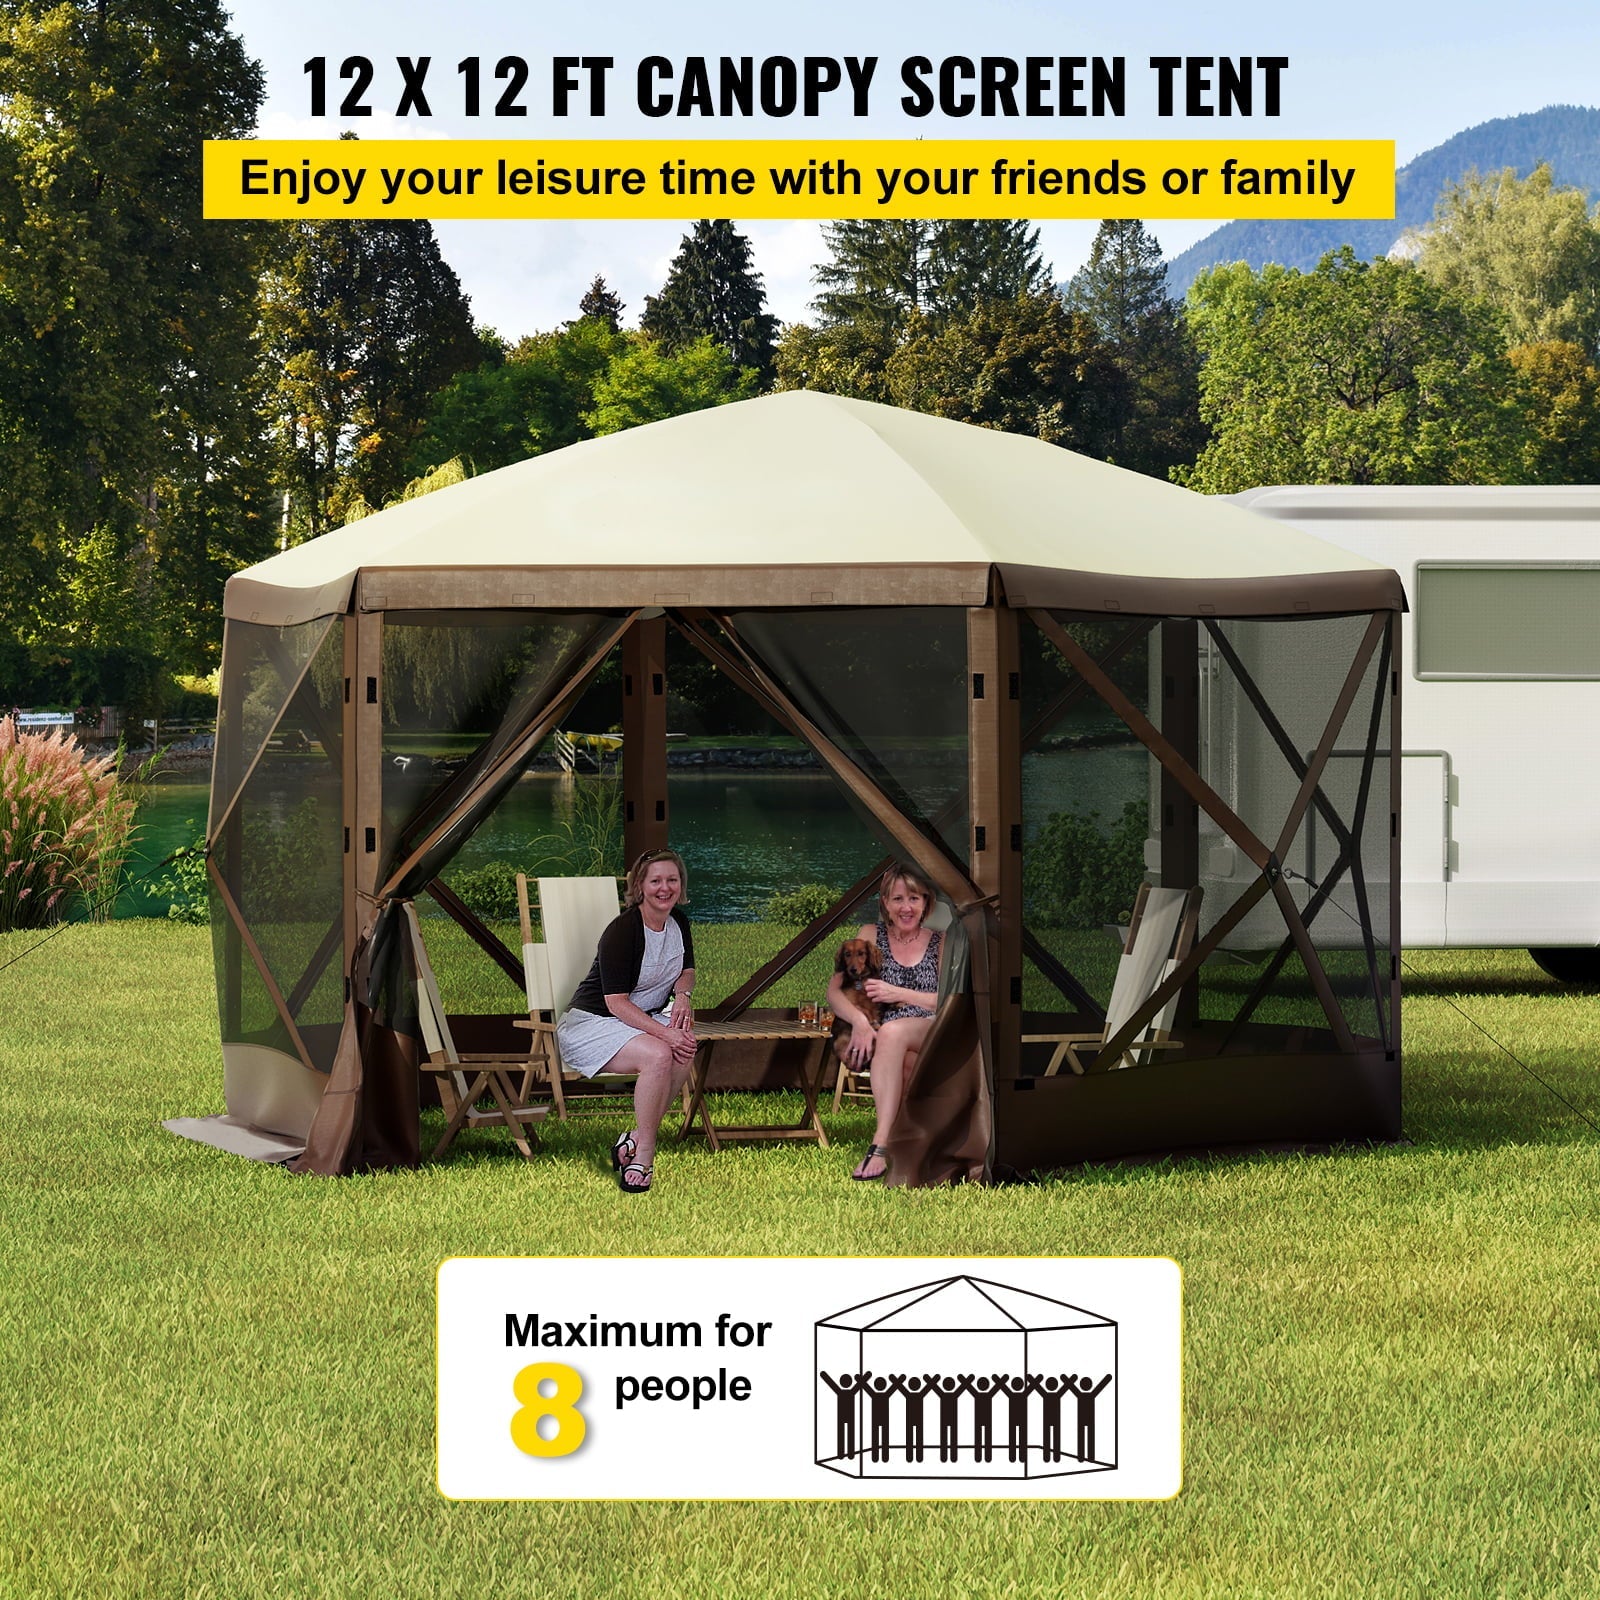 VEVORbrand Camping Gazebo Tent, 12'x12', 6 Sided Pop-up Canopy Screen Tent for 8 Person Camping, Waterproof Screen Shelter w/Portable Storage Bag, Ground Stakes, Mesh Windows, Brown & Beige